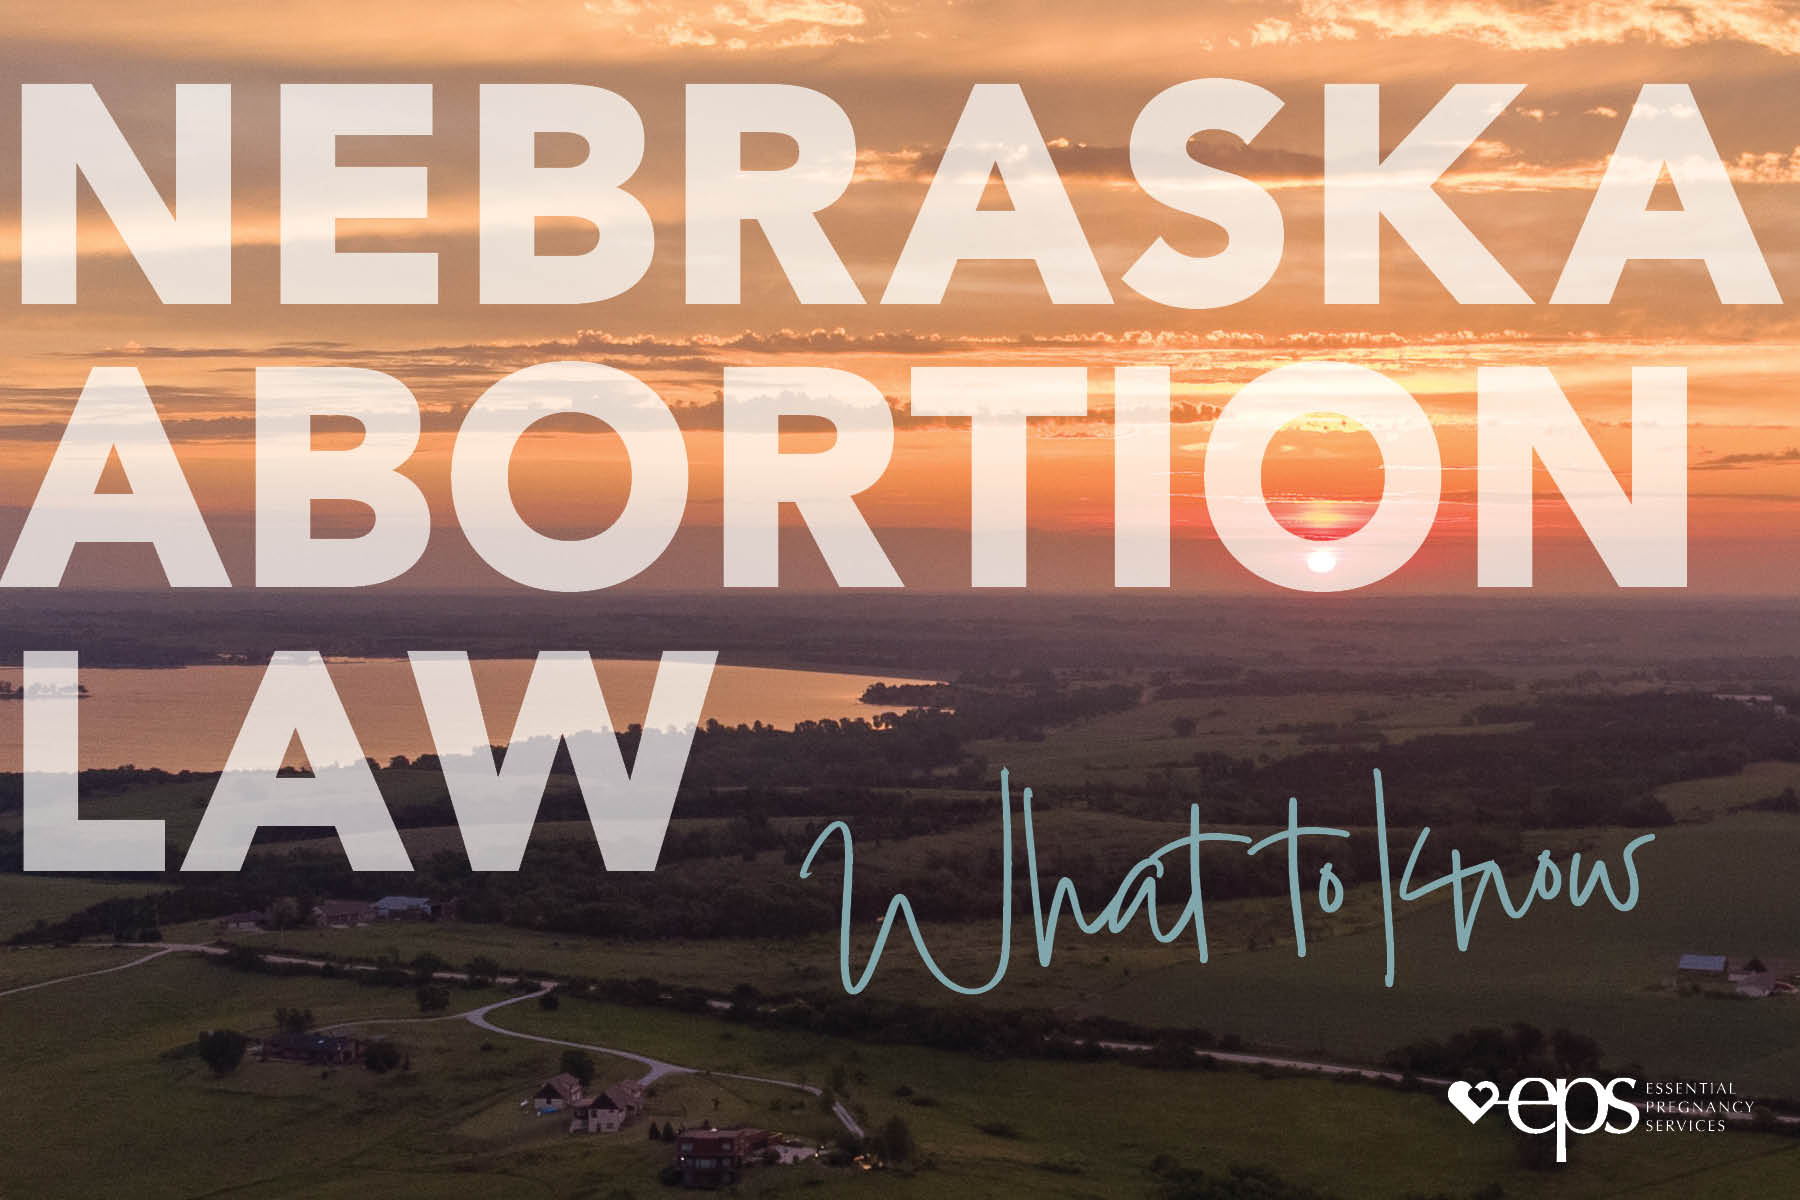 Nebraska Abortion Law: What You Need to Know